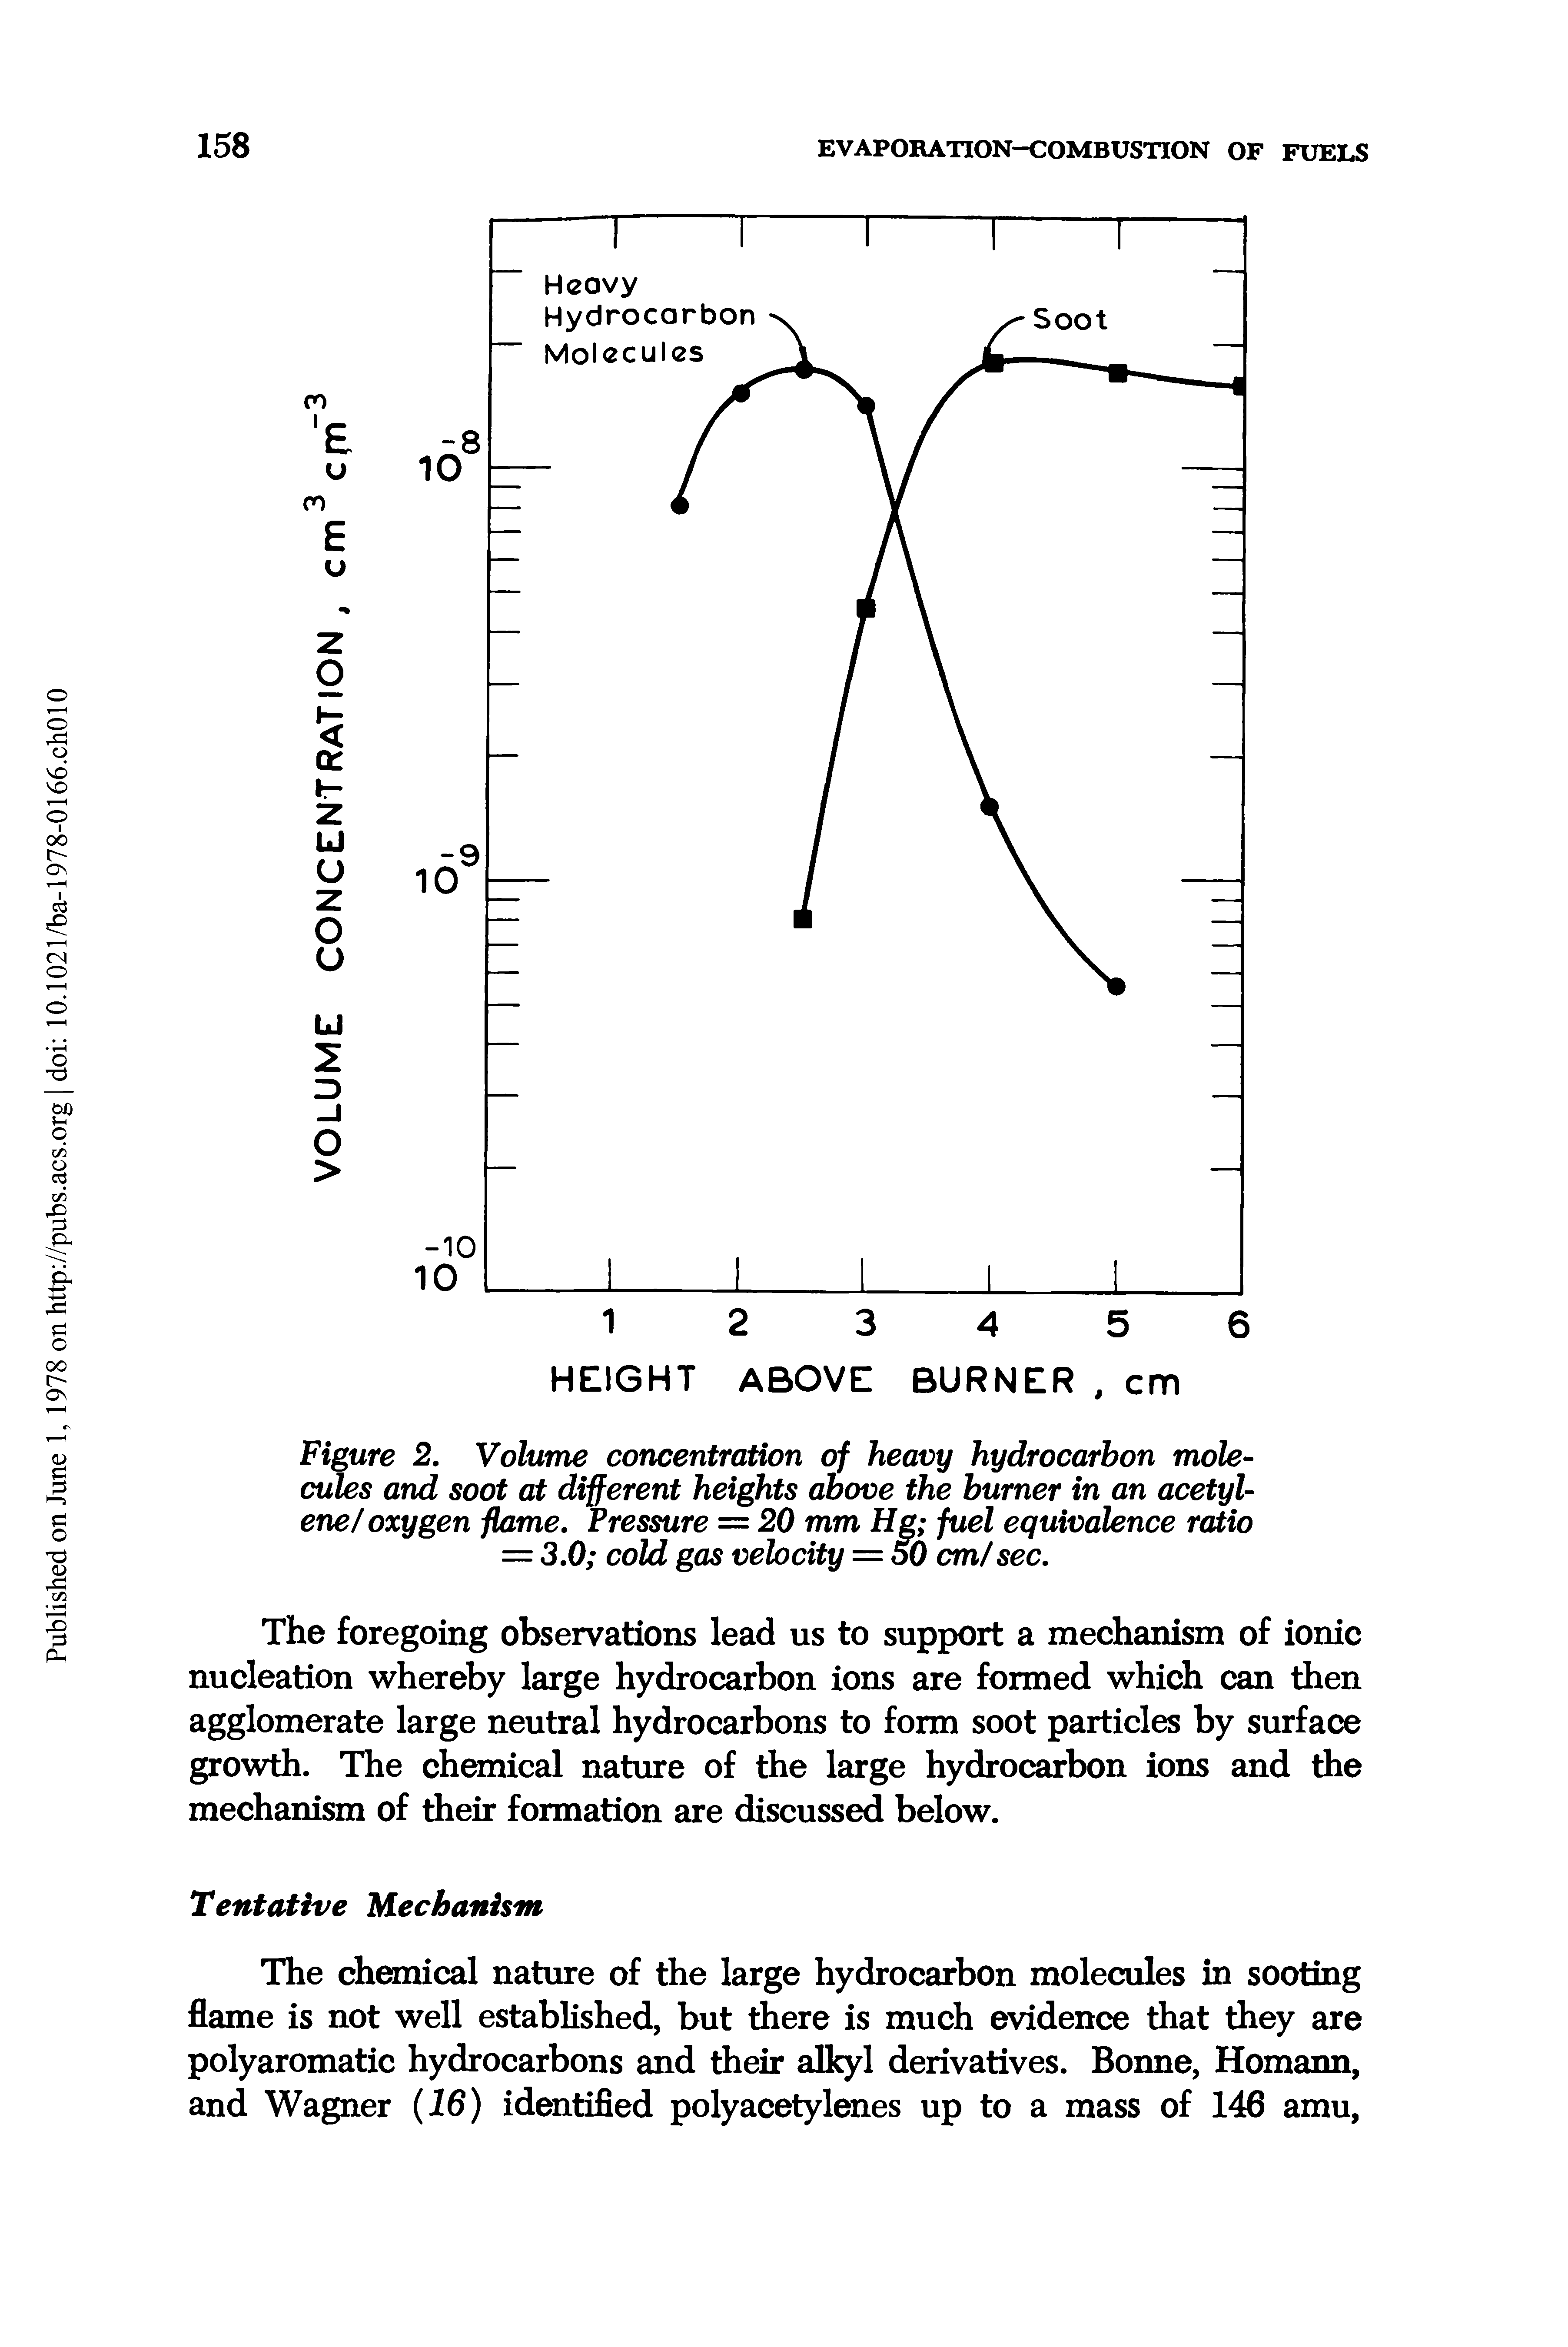 Figure 2, Volume concentration of heavy hydrocarbon molecules and soot at different heights above the burner in an acetylene/oxygen flame. Pressure = 20 mm Hg fuel equivalence ratio = 3.0 cold gas velocity = 50 cm sec.